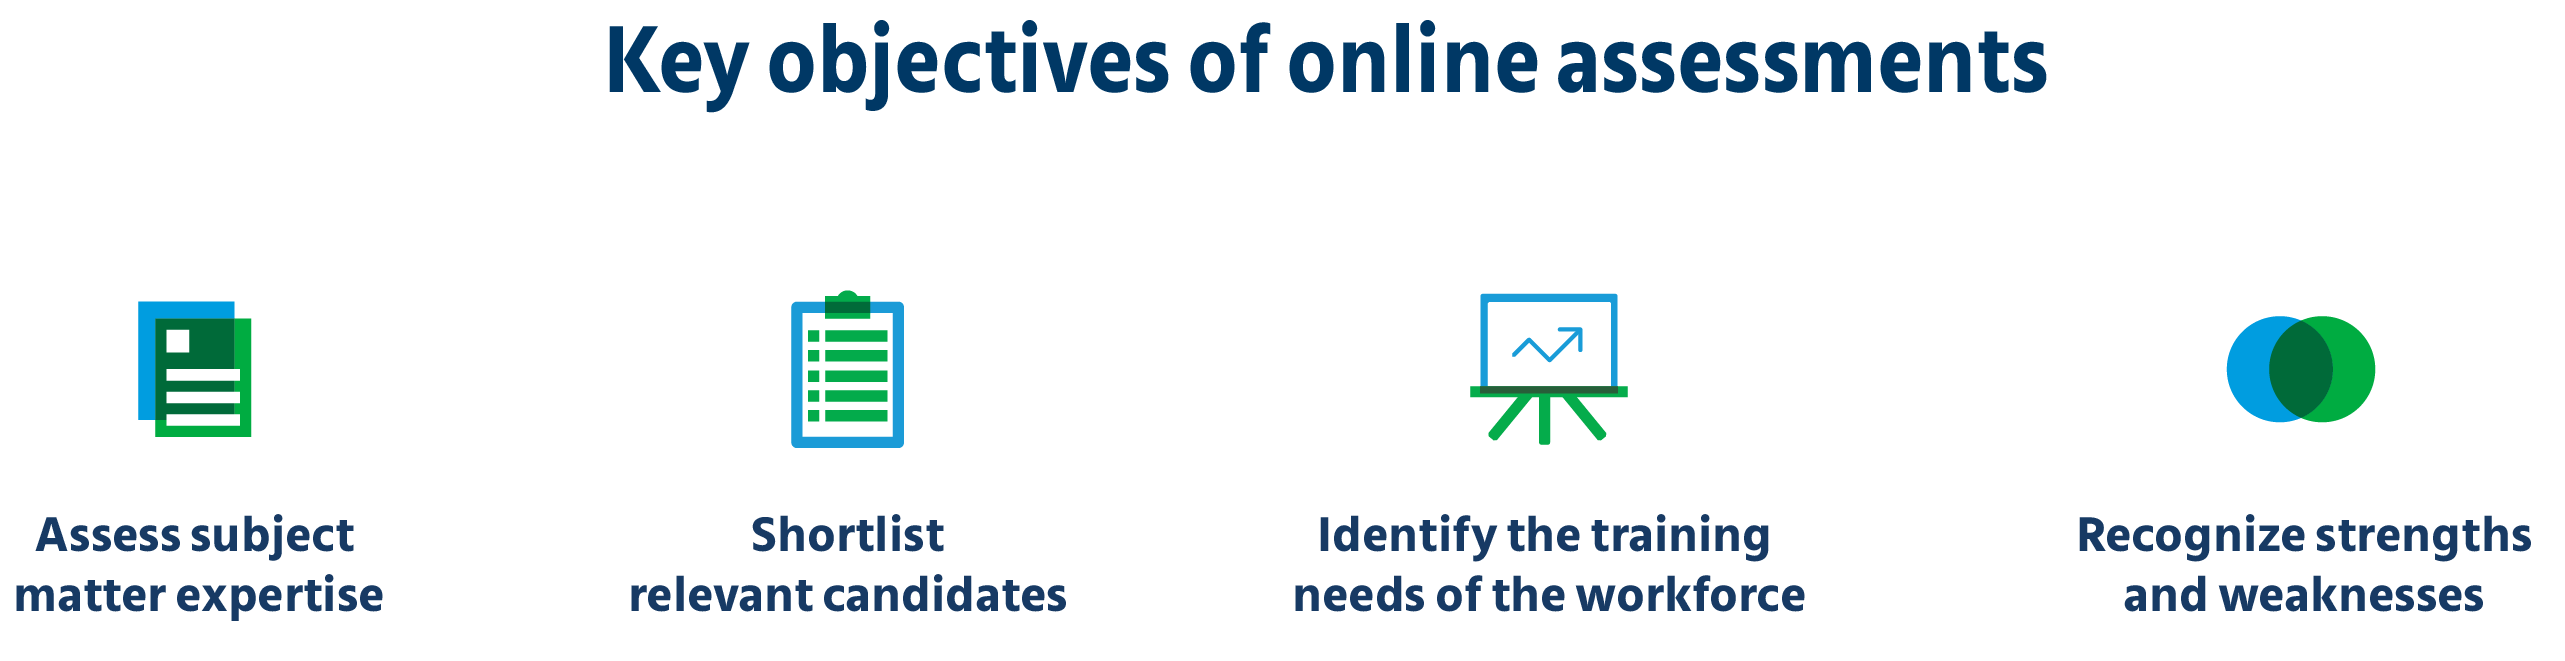 main objectives of online assessments